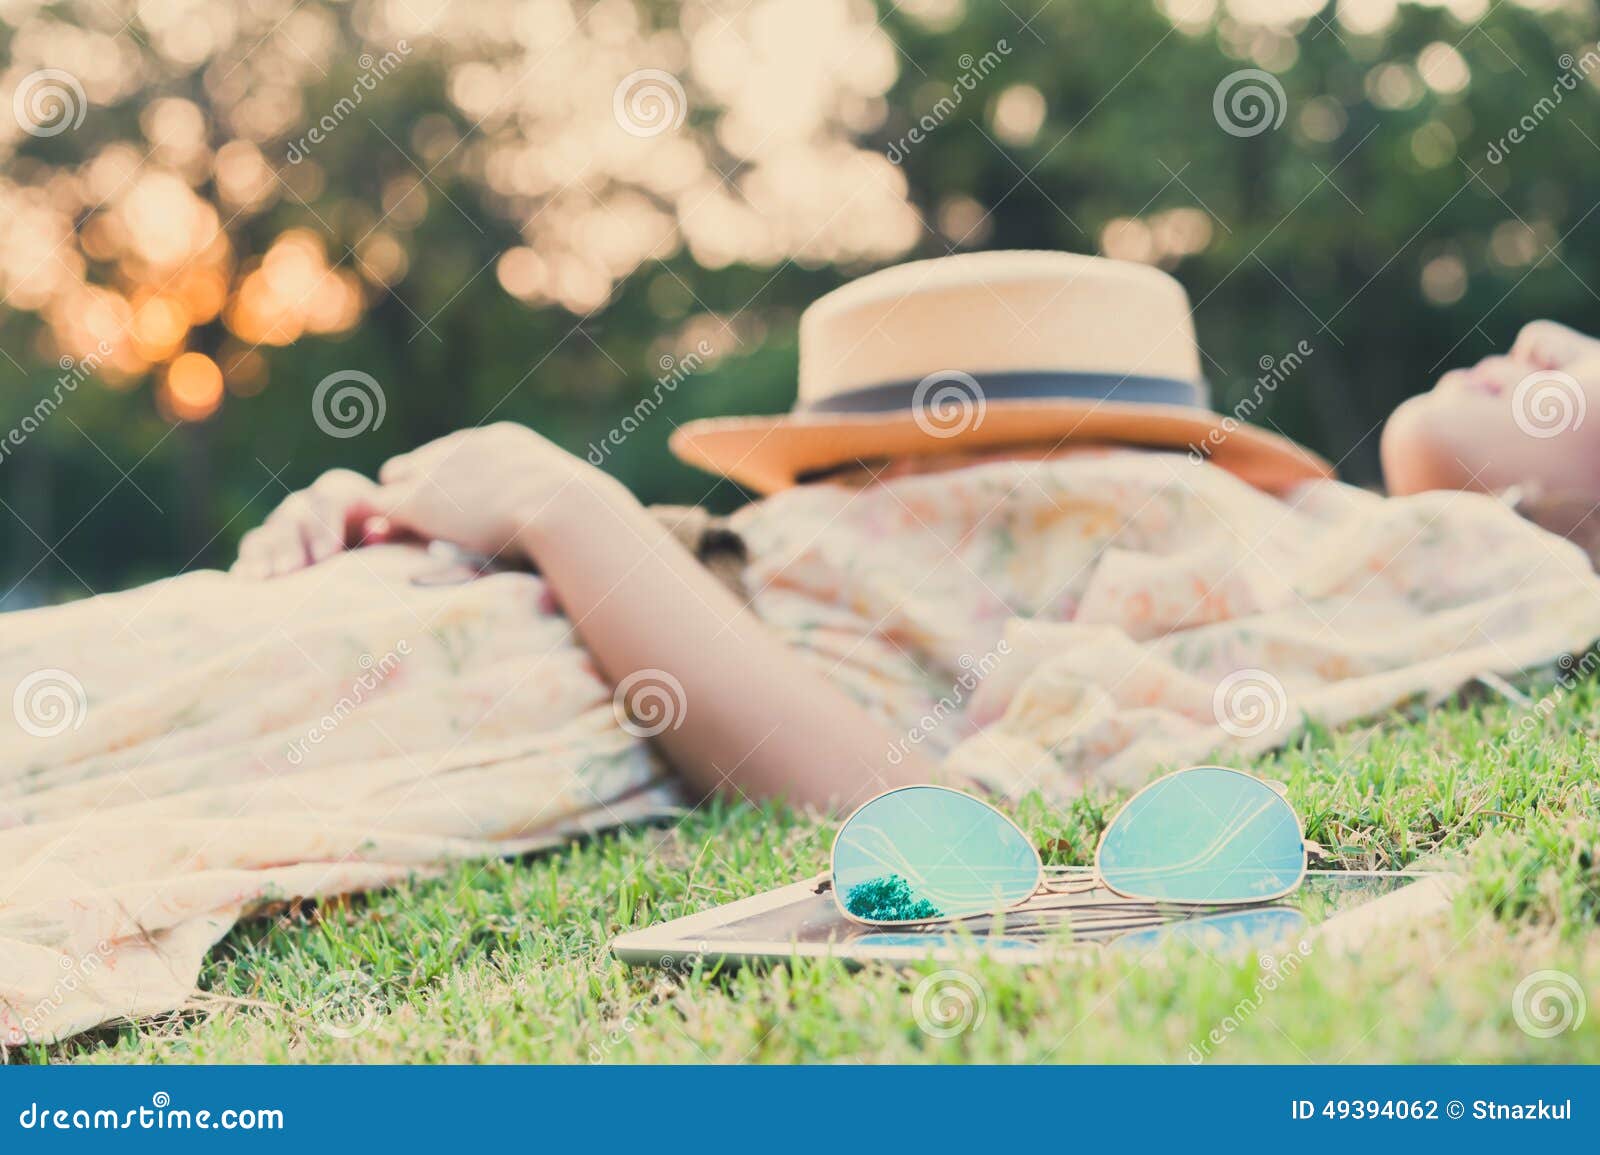 fasion sun glasses with young woman sleeping , vintage style